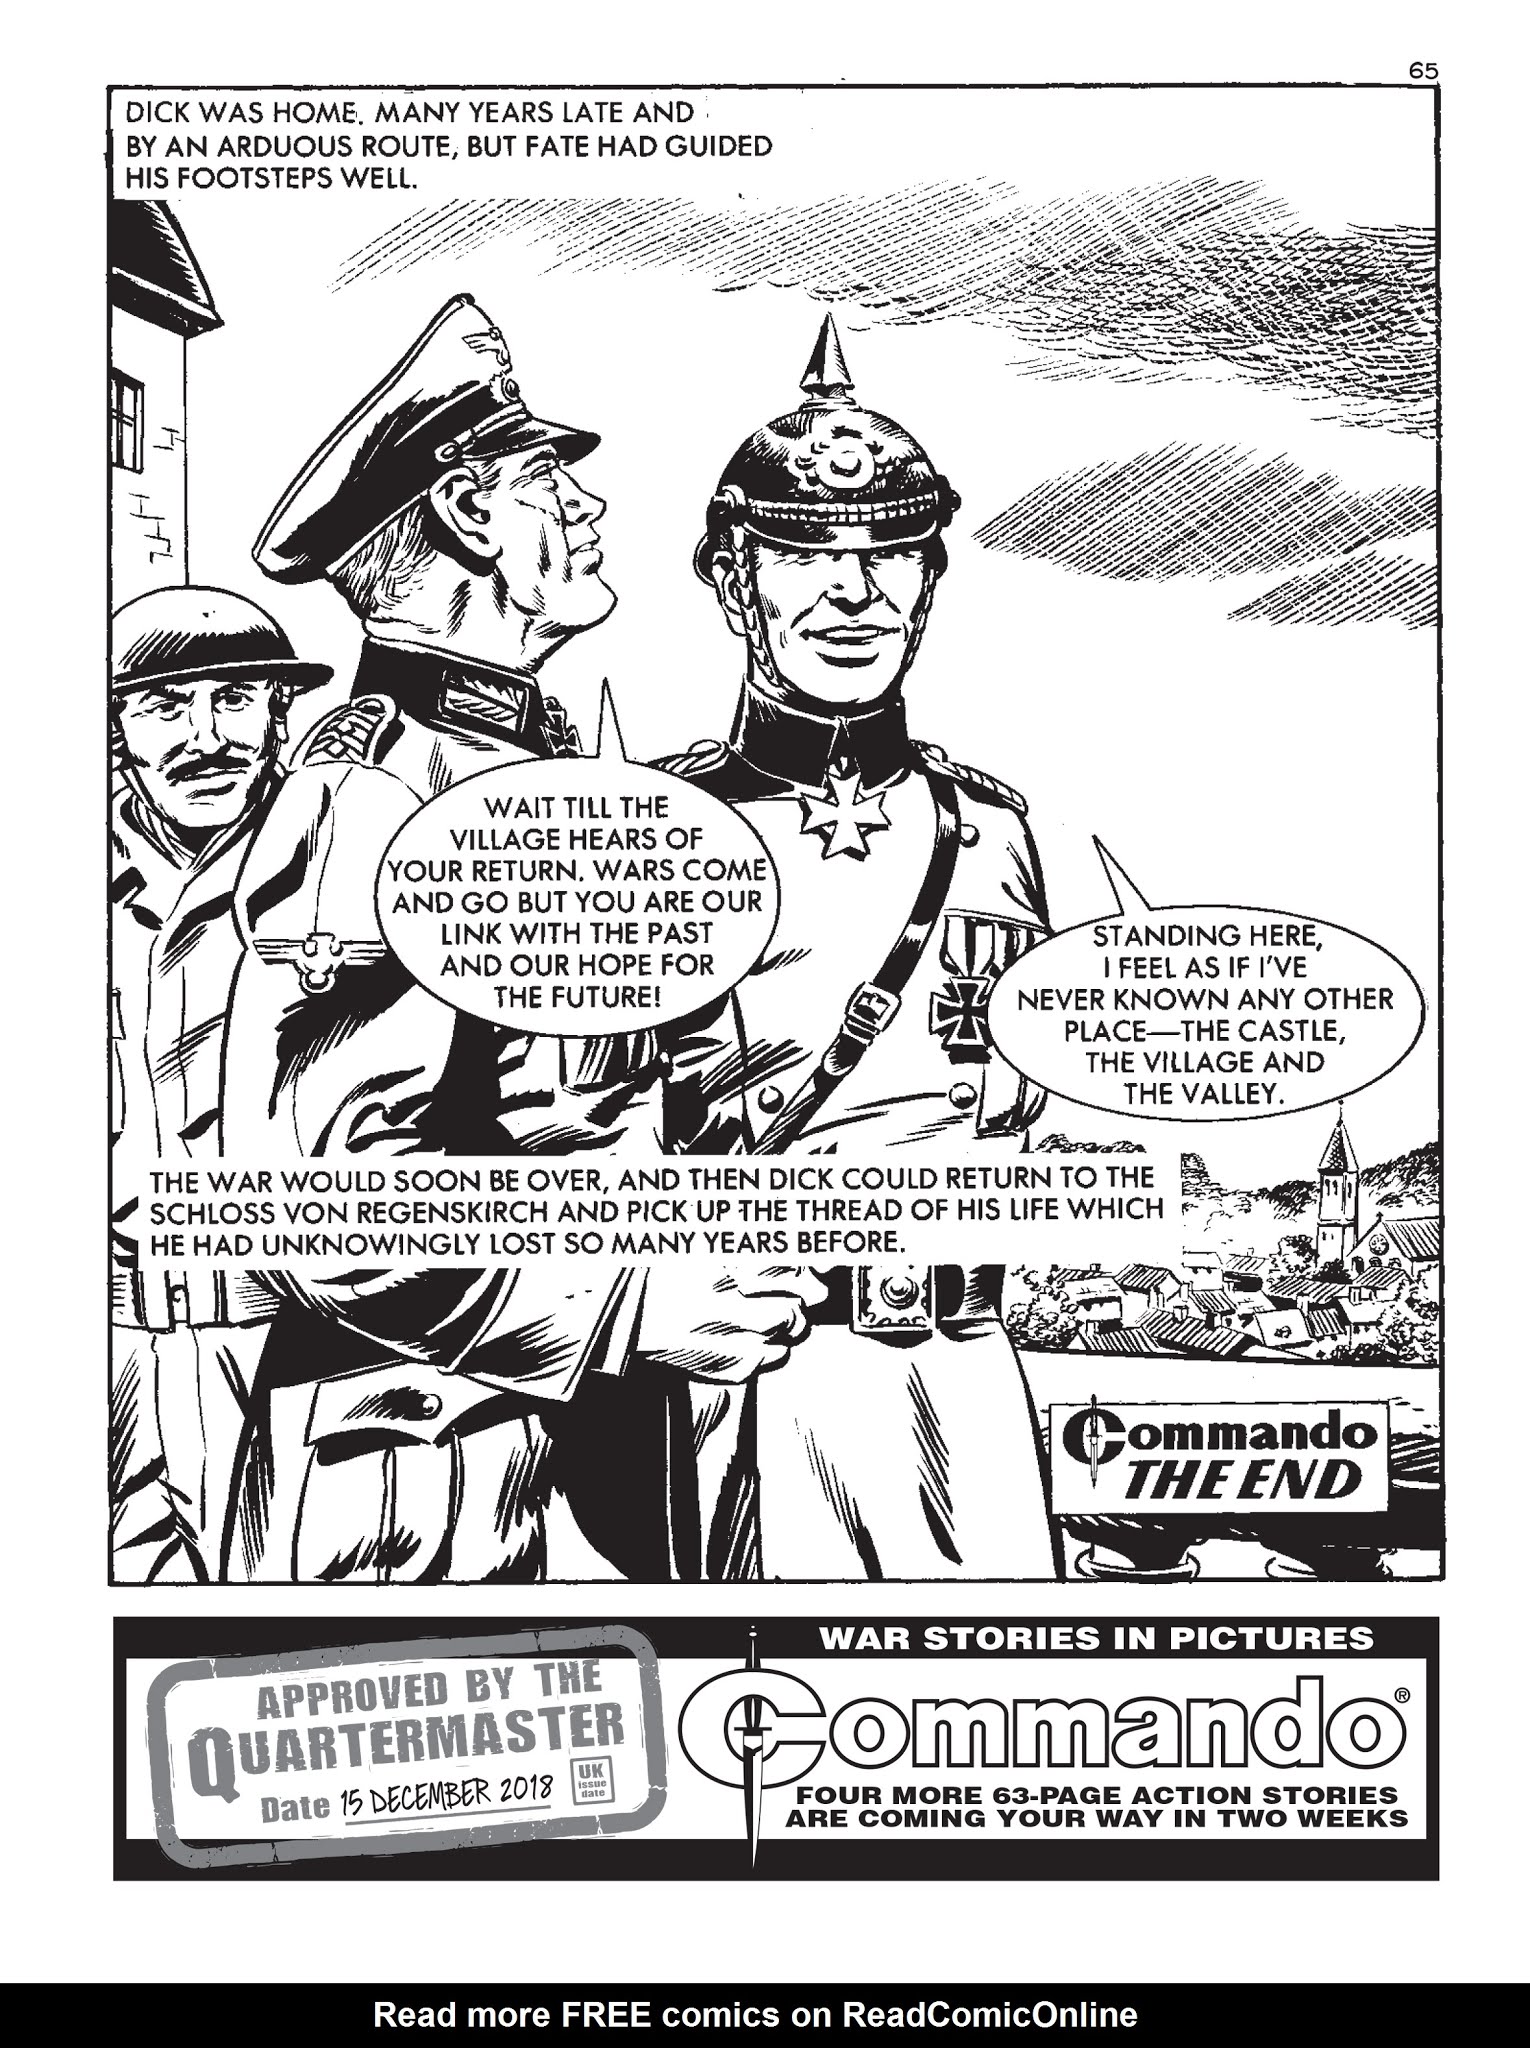 Read online Commando: For Action and Adventure comic -  Issue #5180 - 65